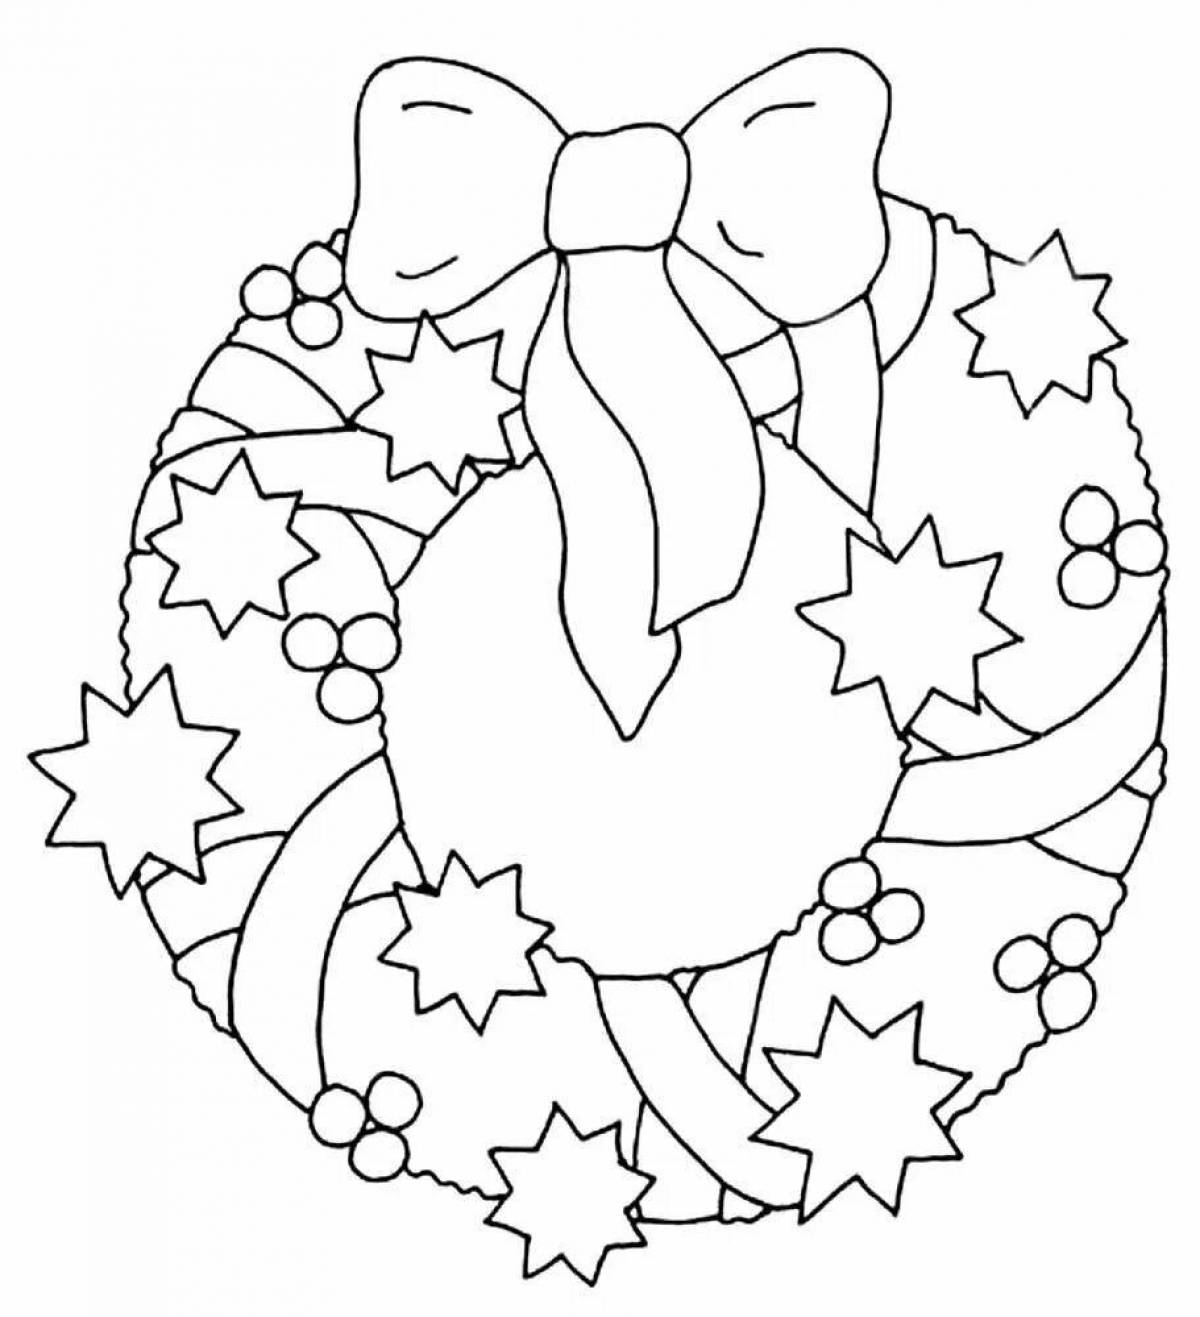 Brightly lit Christmas light coloring book